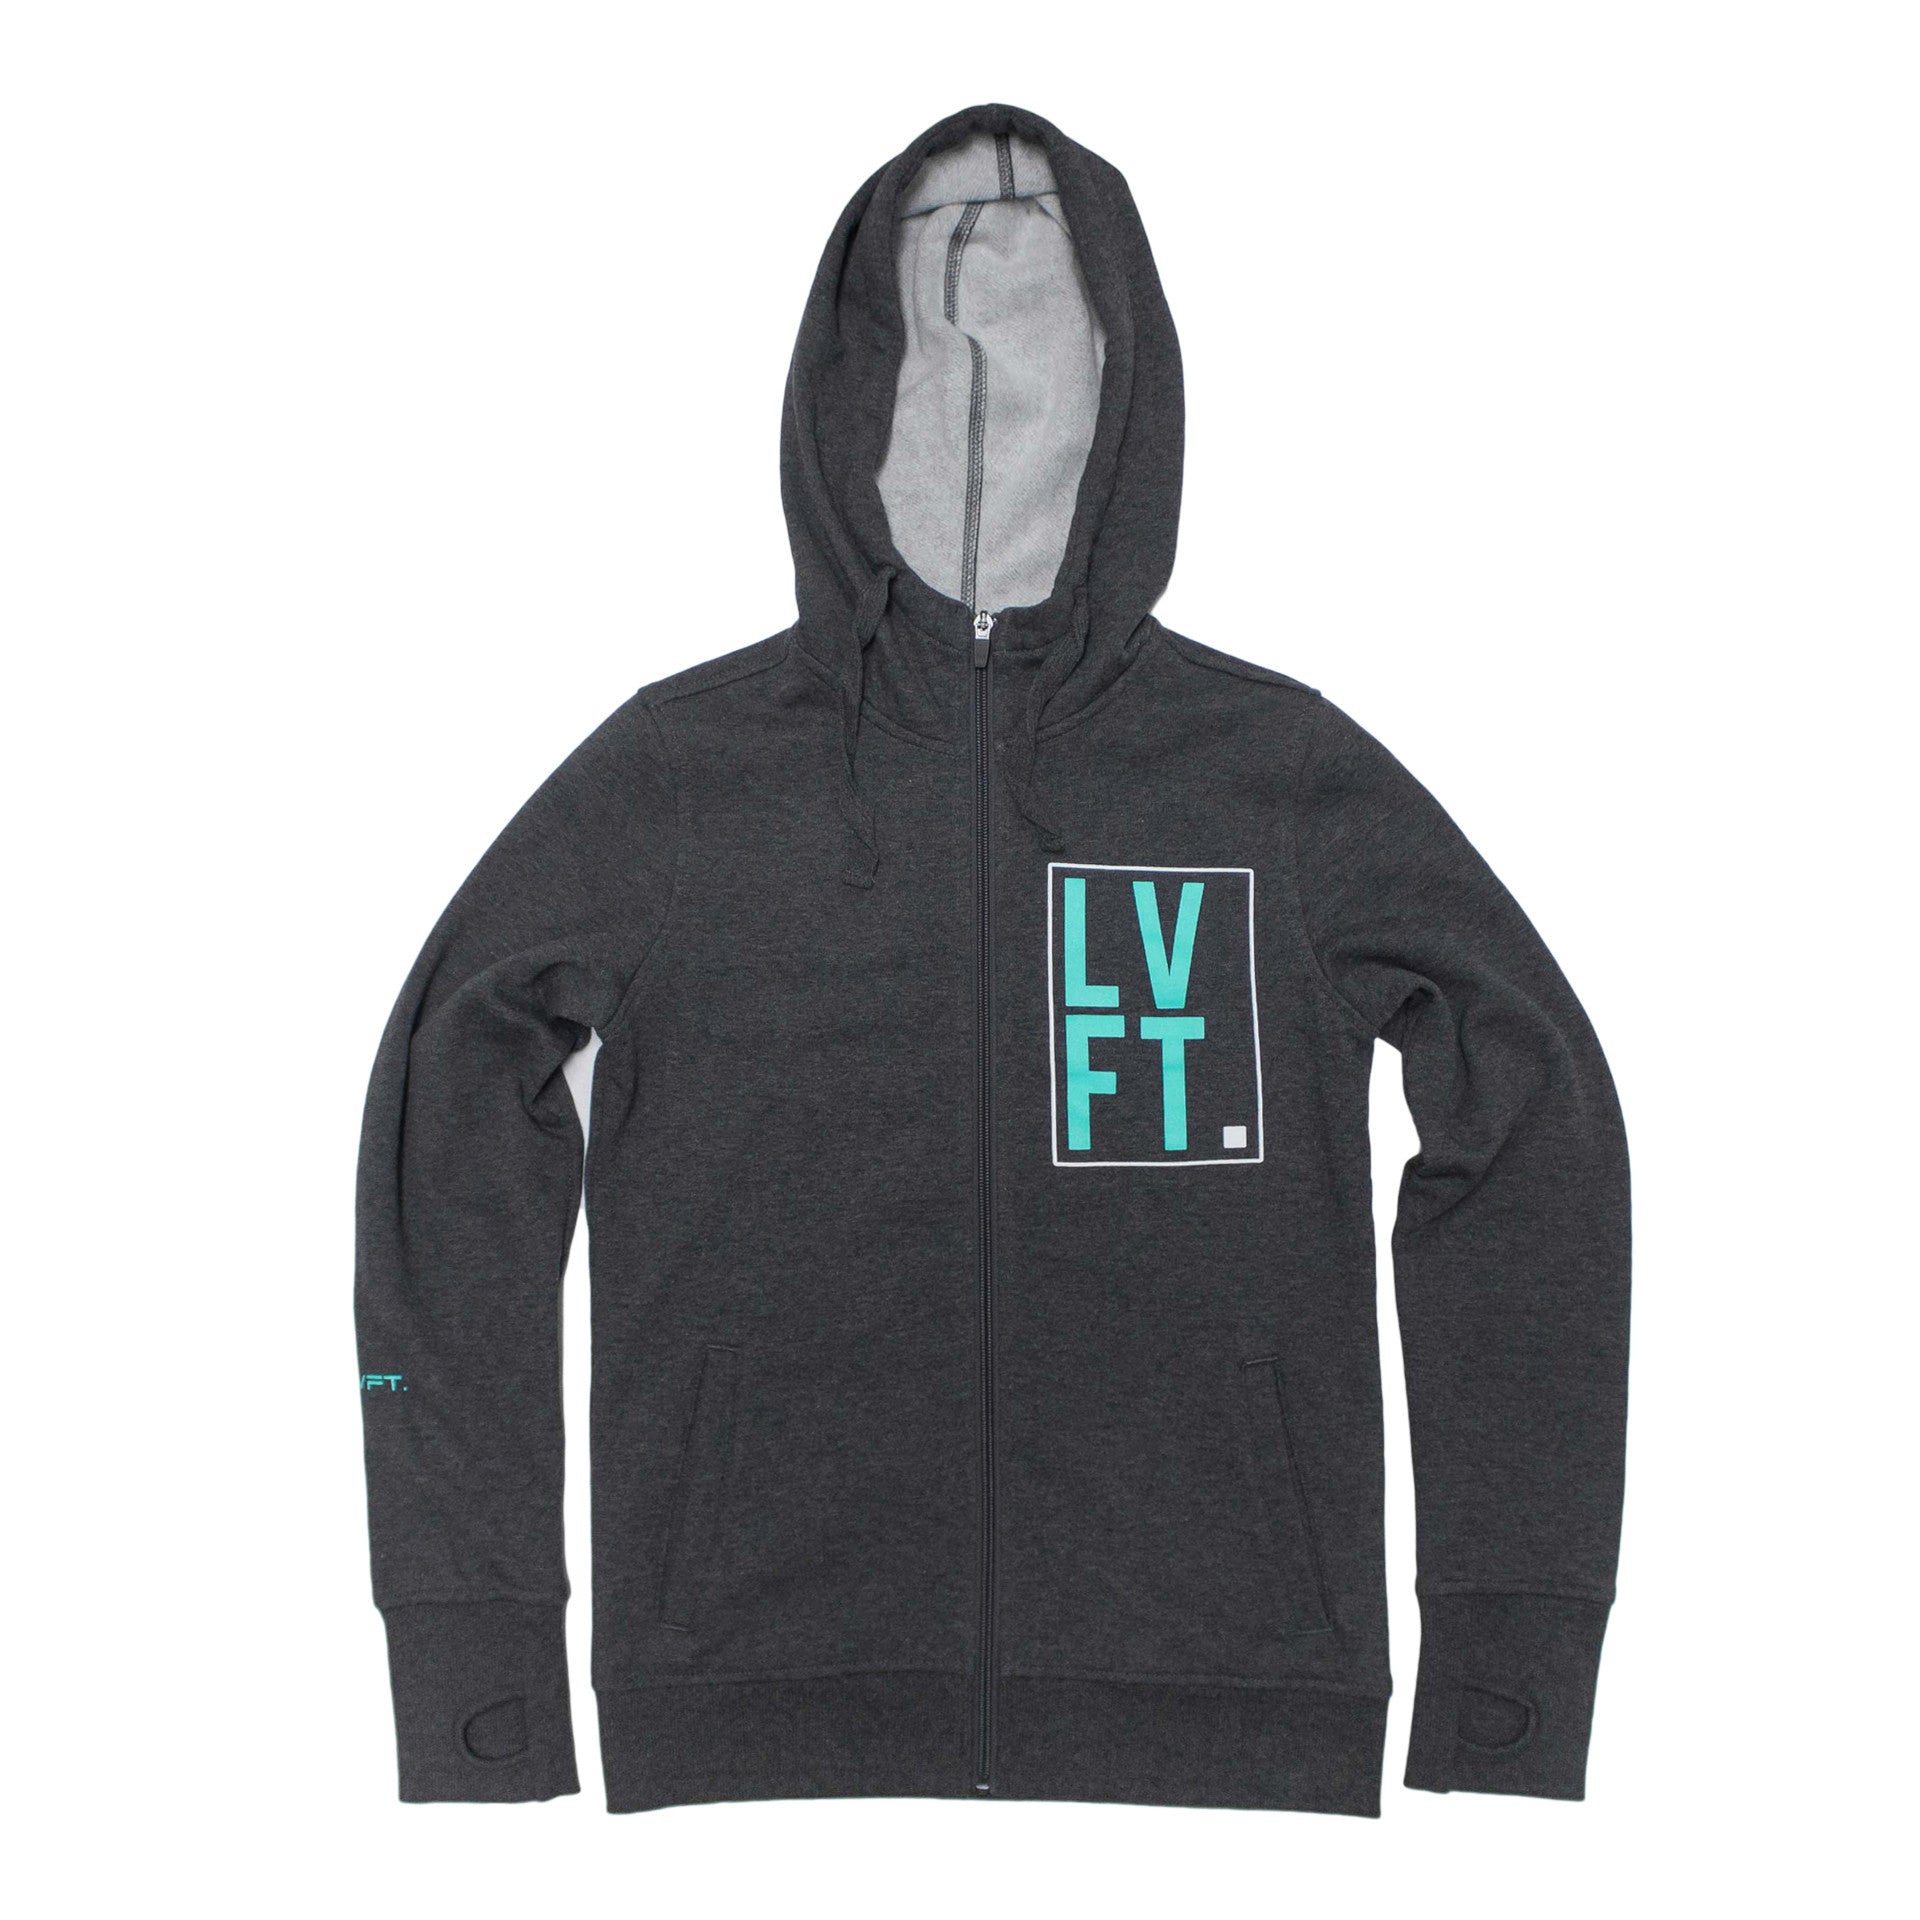 Women's Stacked Zip Up - Charcoal - Live Fit. Apparel